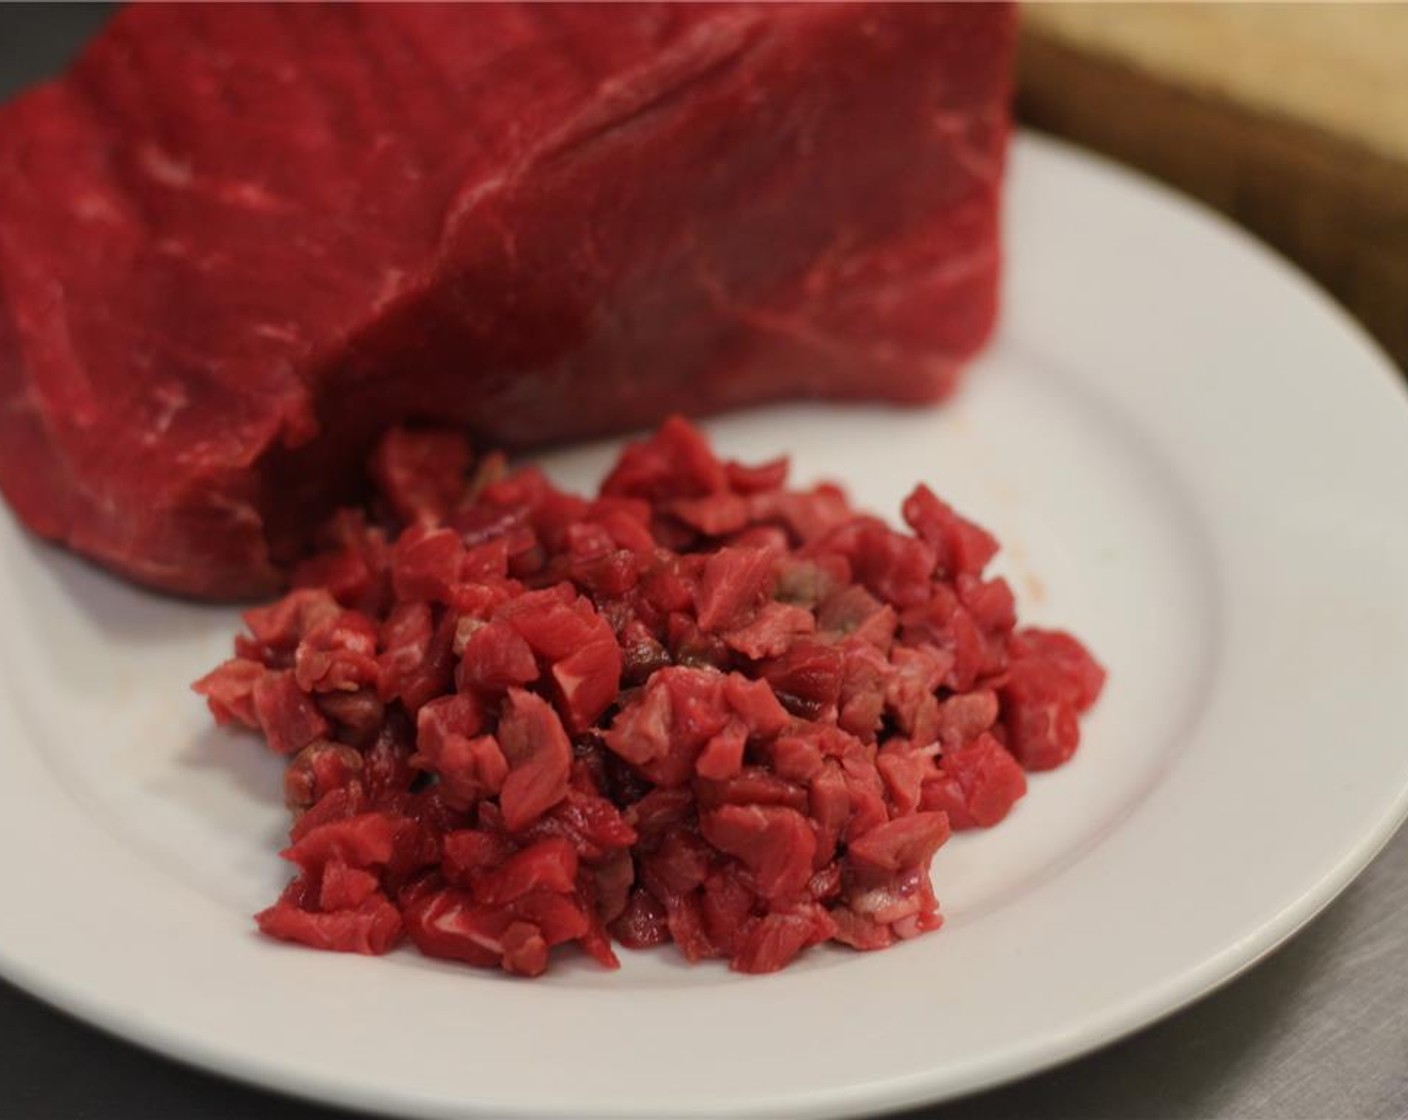 step 2 Dice the Beef Sirloin Ball Tip (3 oz) into very small pieces by cutting pieces along the grain, then slicing into strips and finally into a small dice. Make sure to use a sharp knife!